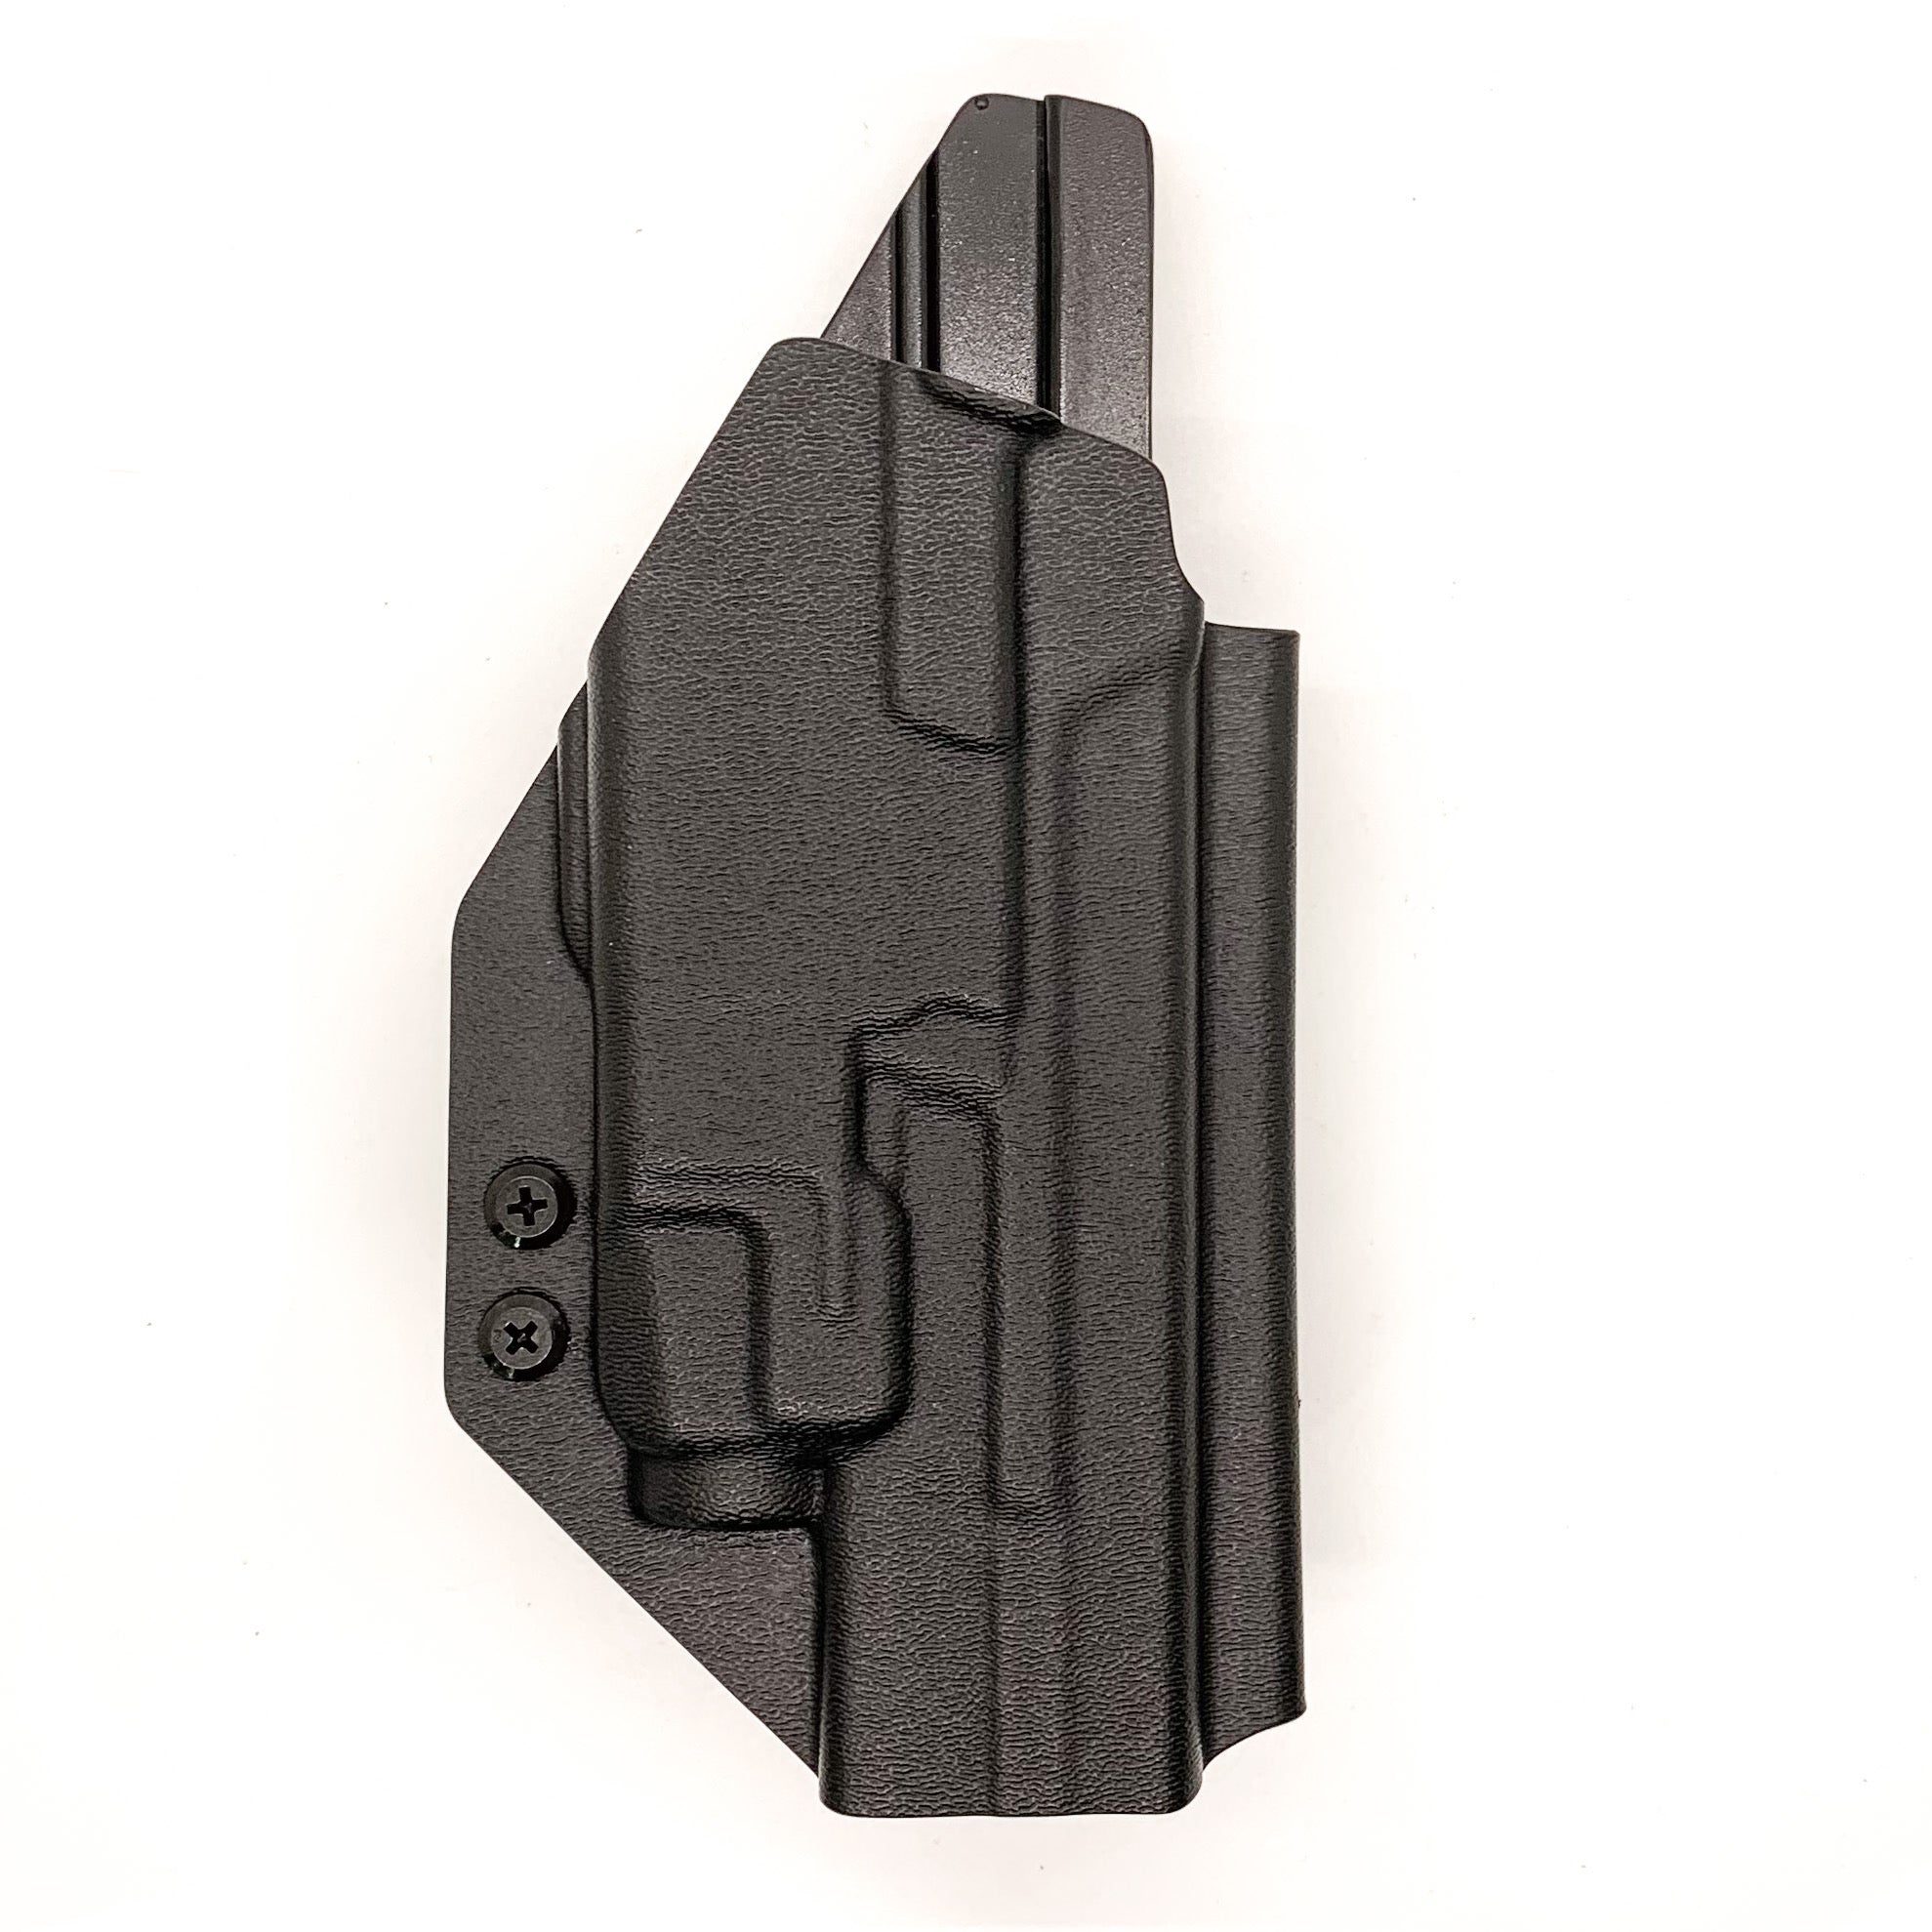 For the best, Outside Waistband OWB Kydex Taco Holster designed to fit the Smith & Wesson M&P 4.6" 10mm M2.0 pistol with thumb safety & TLR-7, TLR-7A or TLR-7X handgun, shop Four Brothers Holsters.  Full sweat guard, adjustable retention, profiled for a red dot sight.  Made in the USA for veterans and law enforcement.